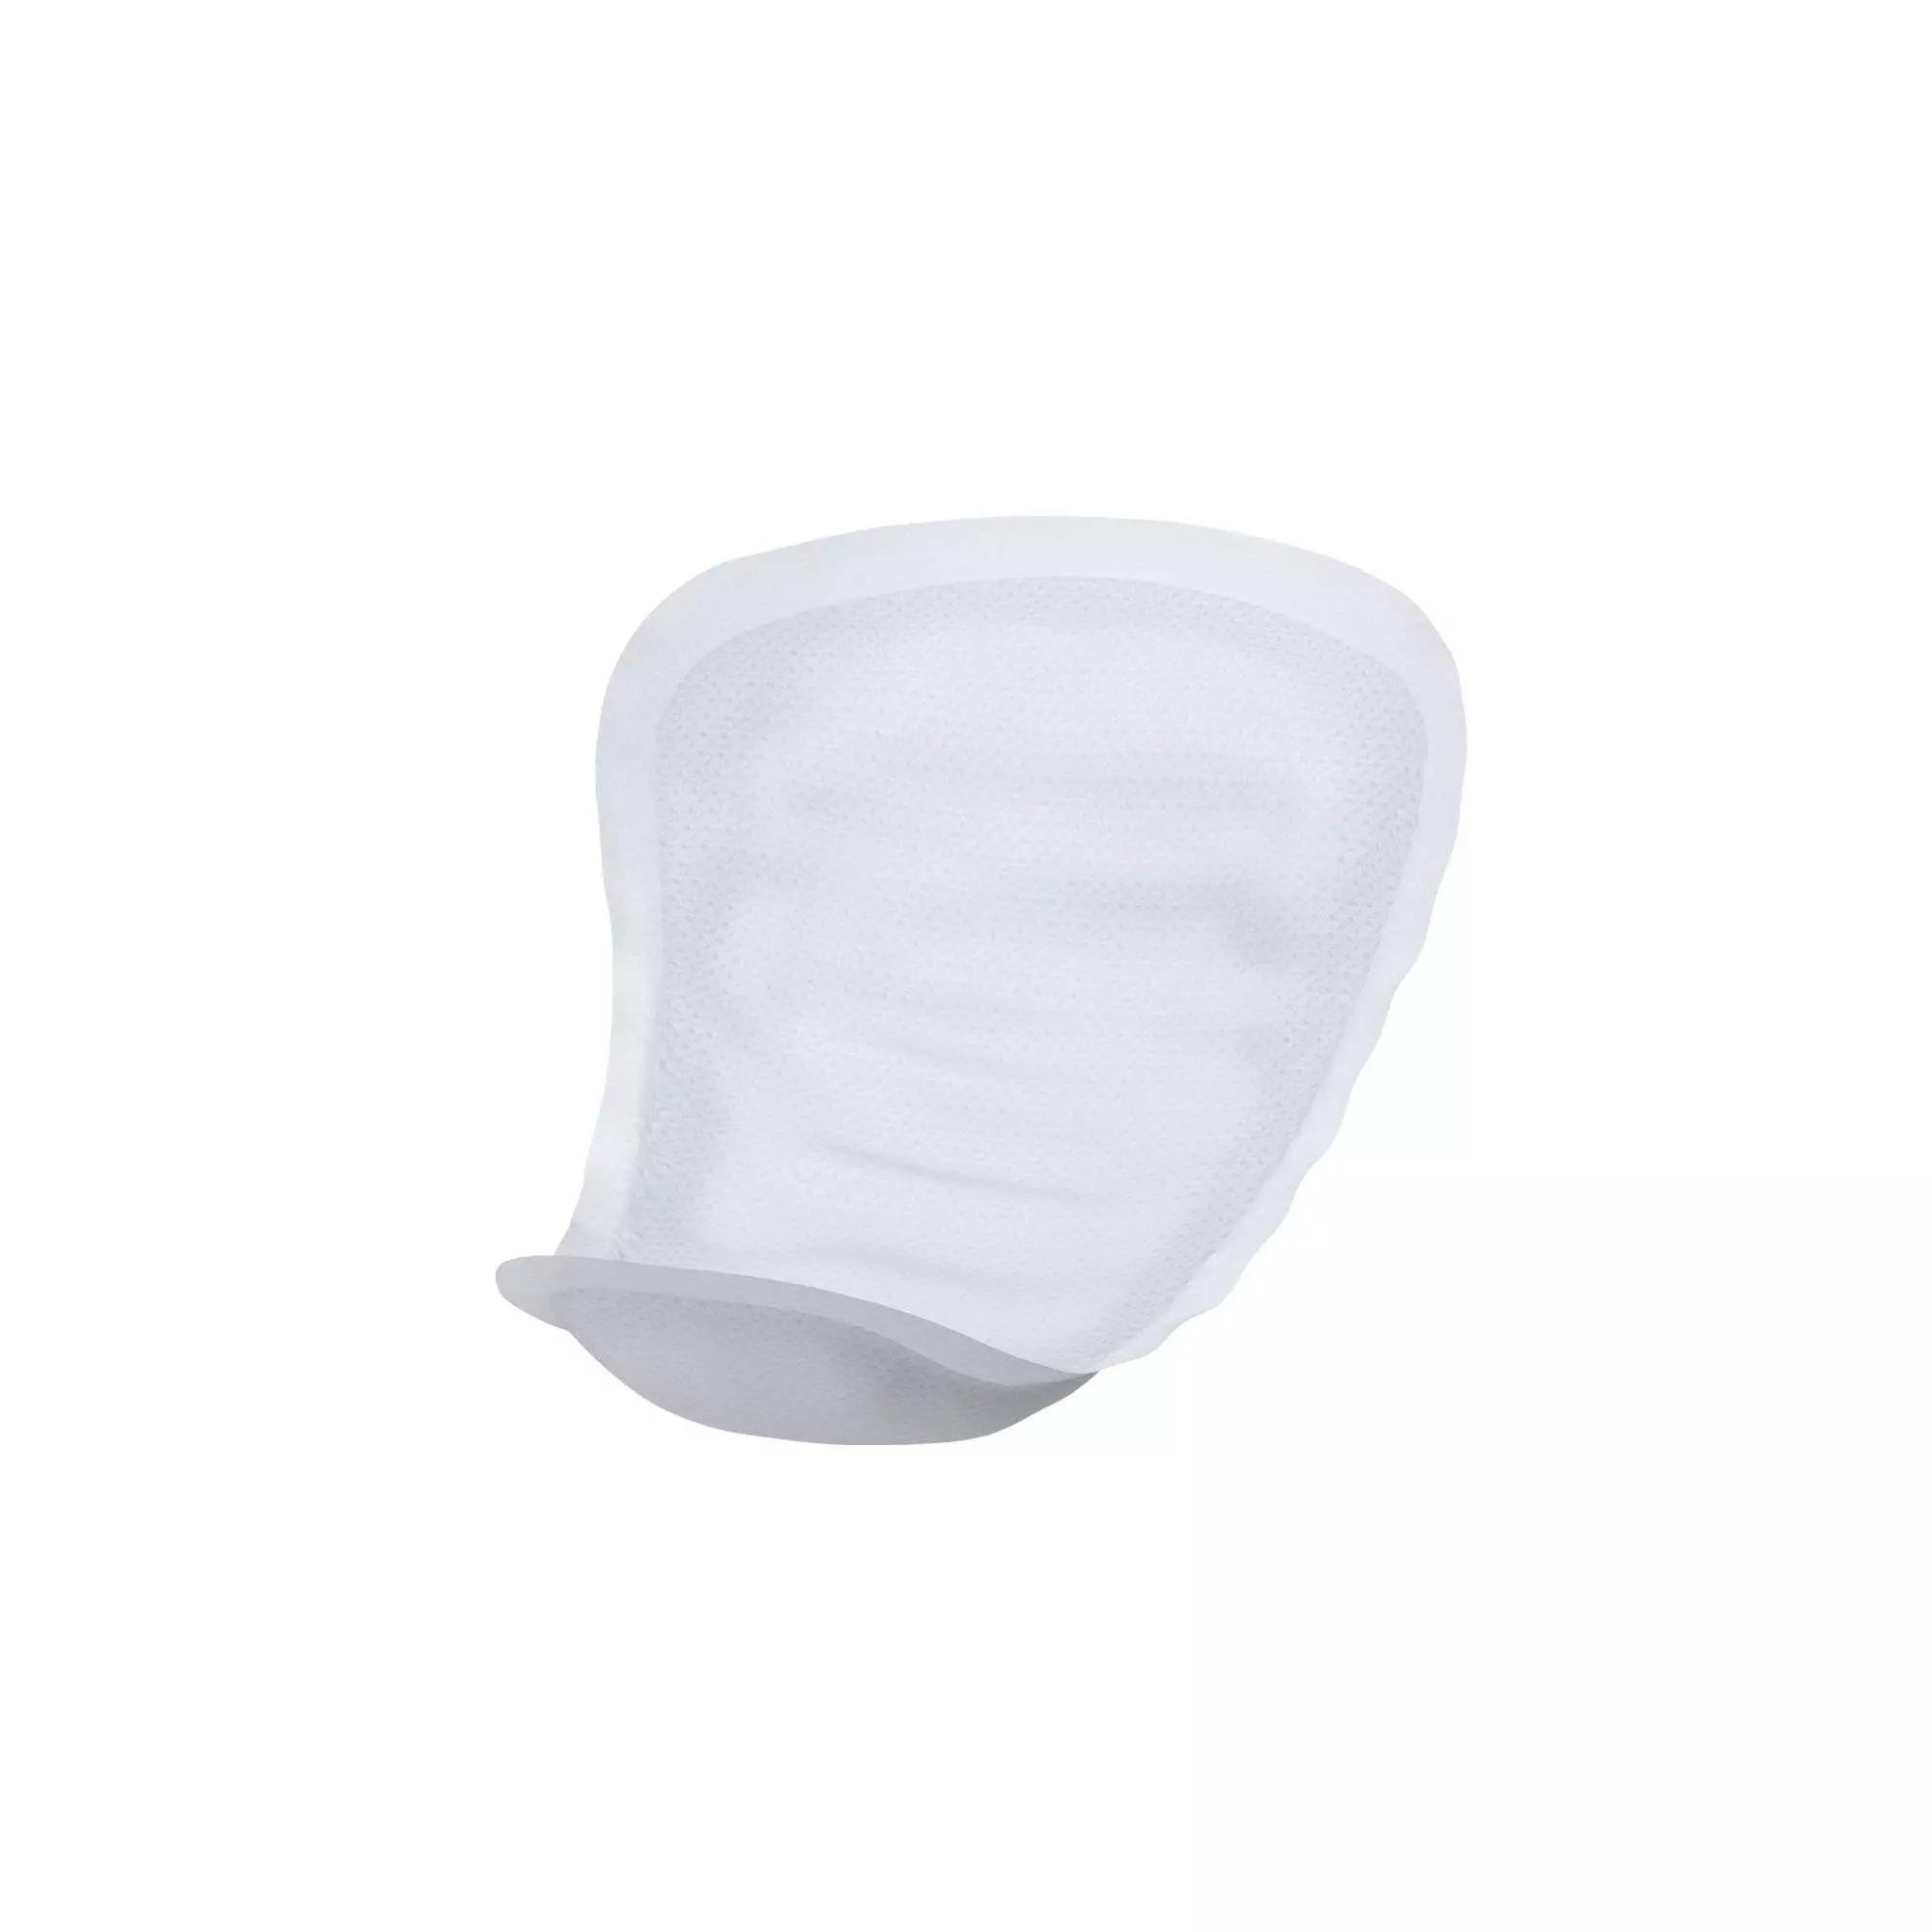 COQUILLE DE PROTECTION SLIPEE HOMME 100 BLANC